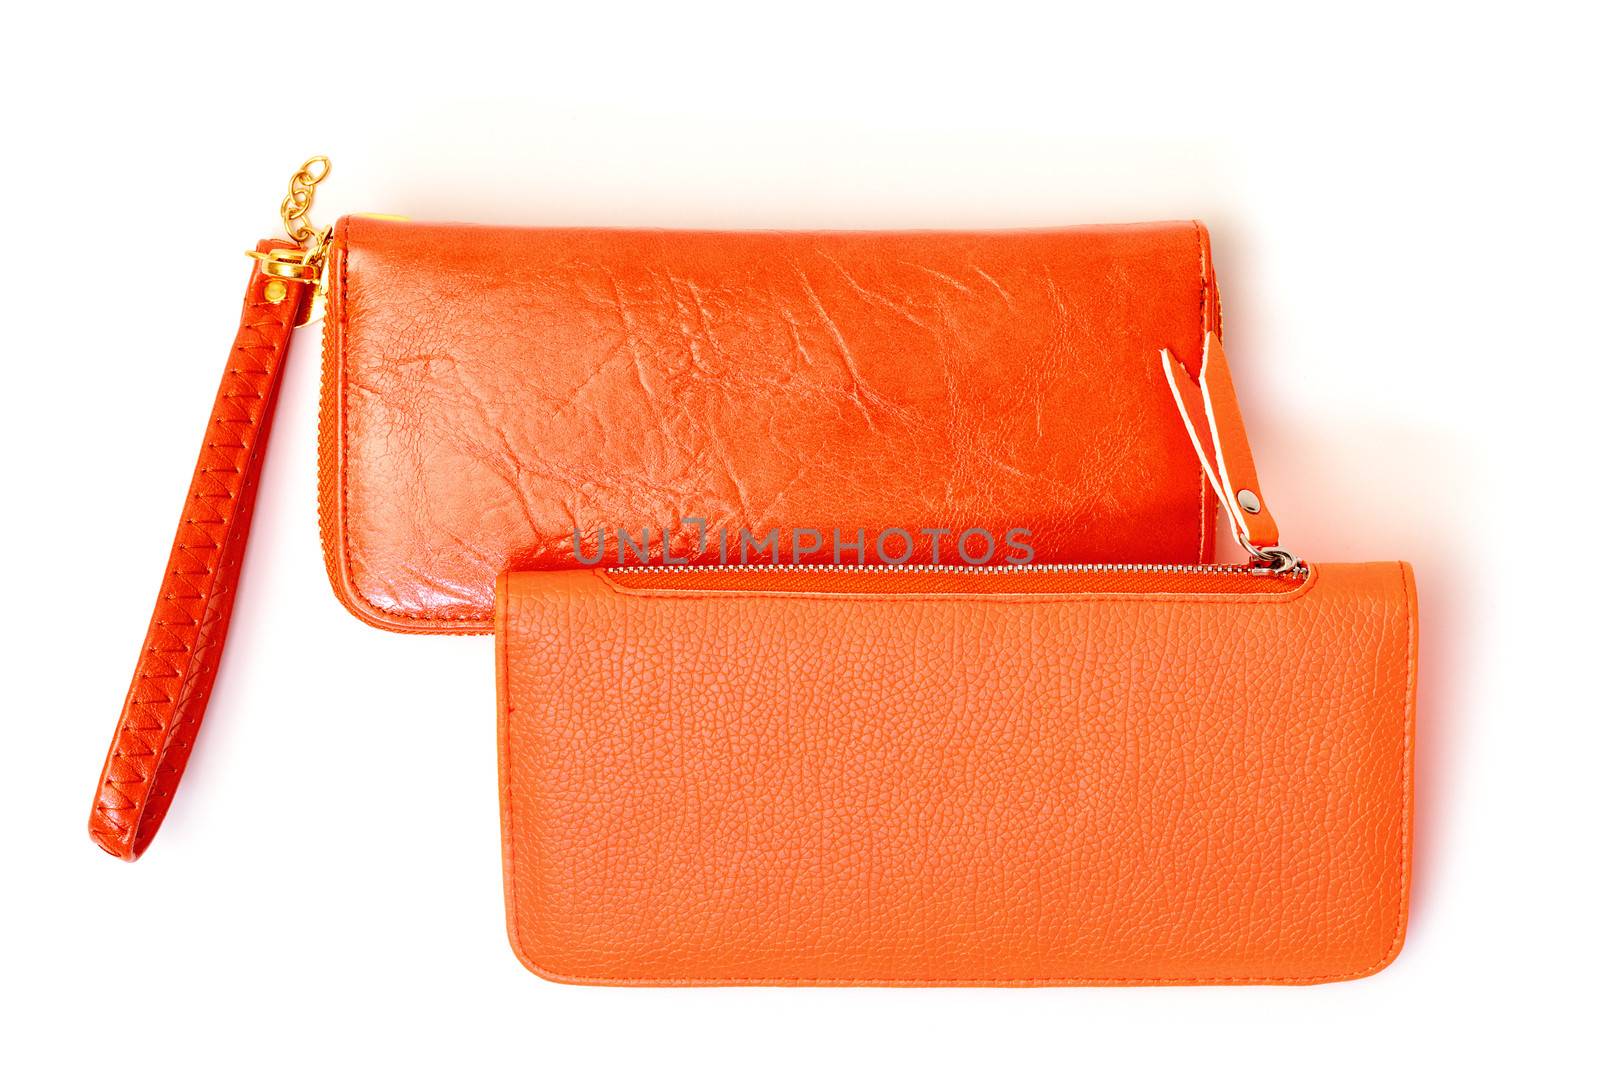 New Orange Leather Wallets by Discovod